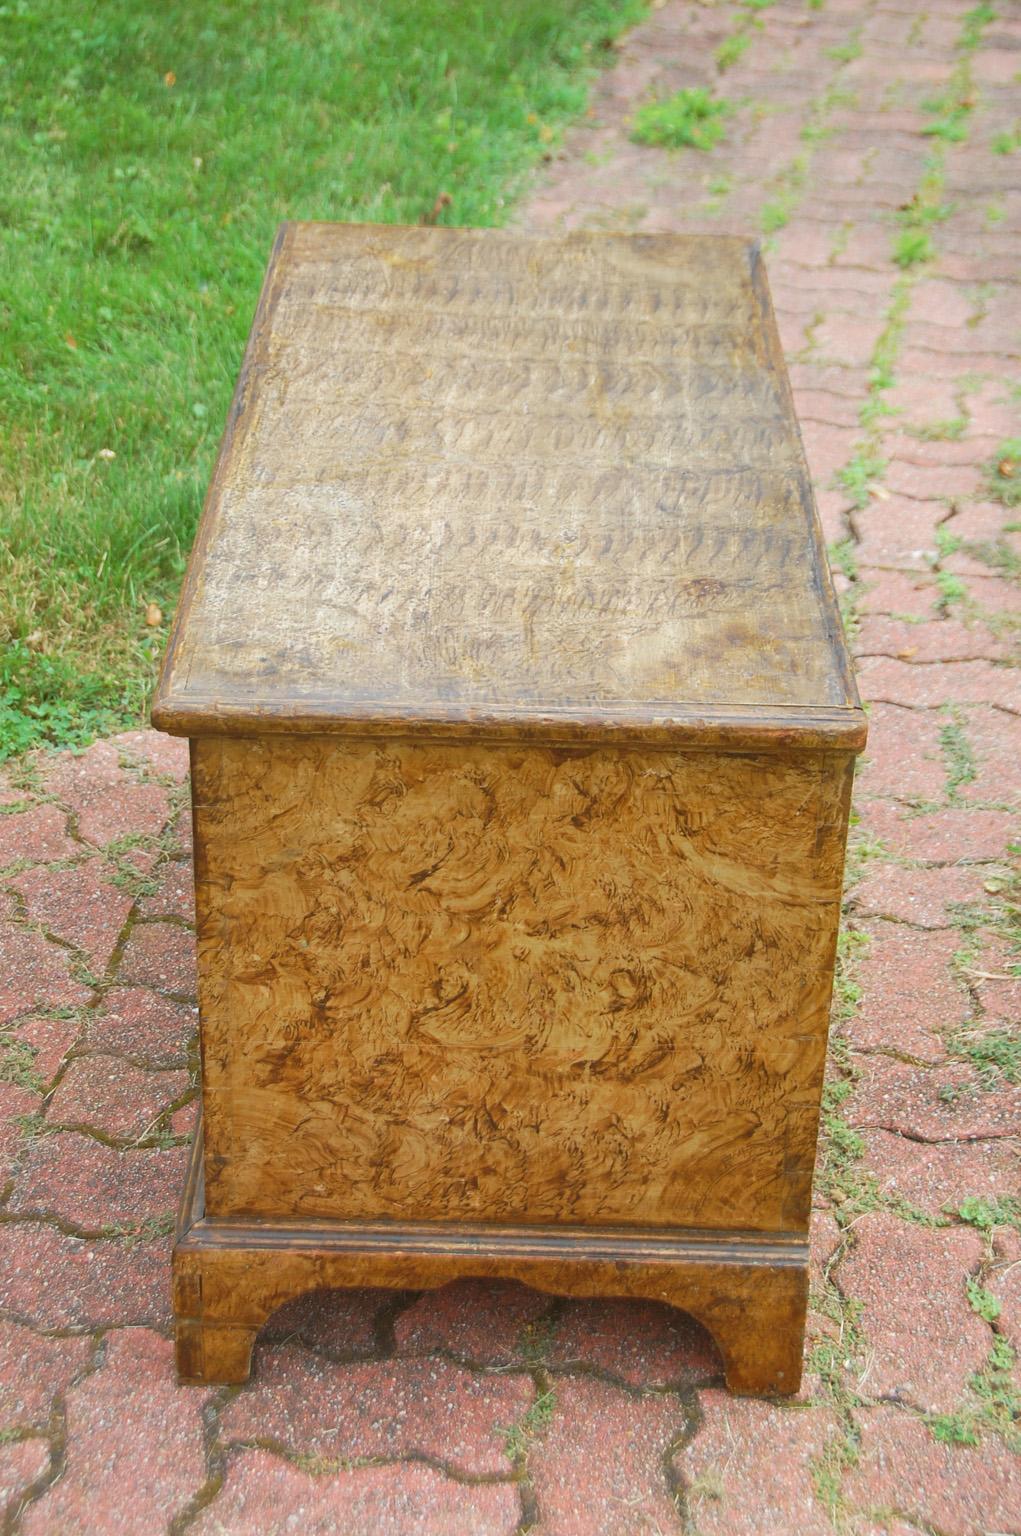 American early 19th century pine trunk with original sponge painted decoration, bracket base and interior ditty box. This trunk is made using the classic dovetailed construction of the time. It retains its original painted surface and has a good dry